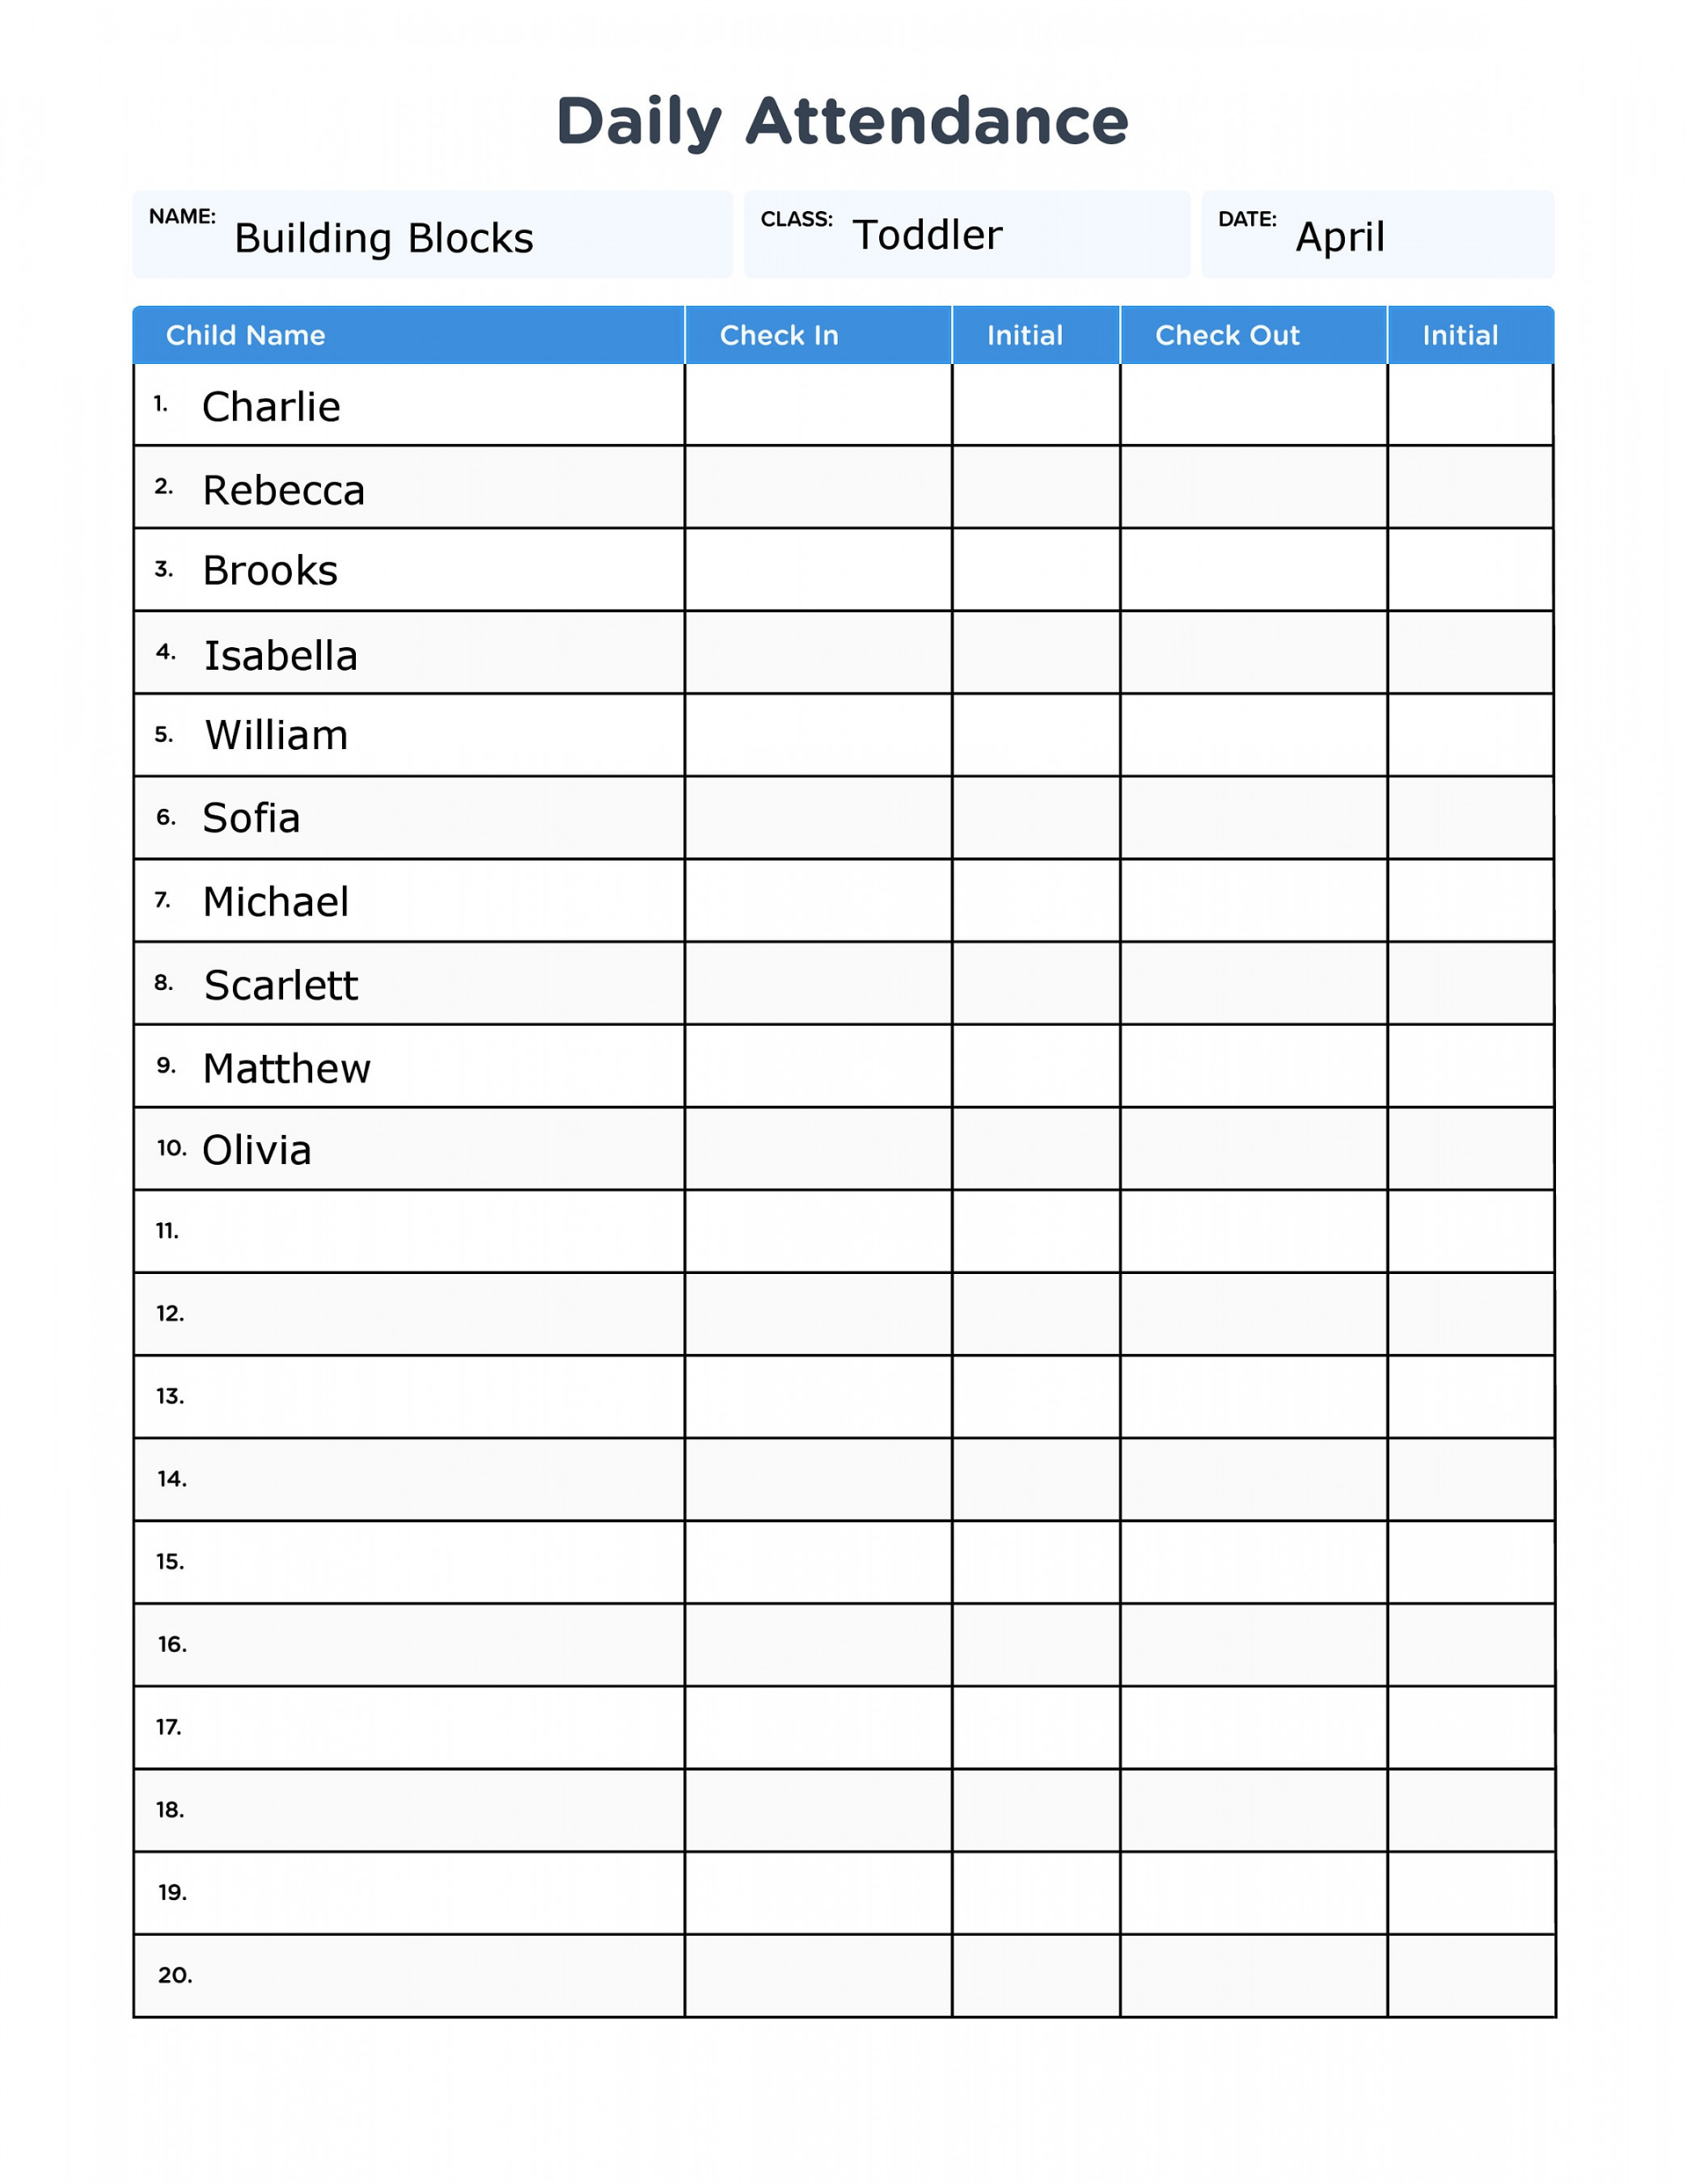 Childcare Daily Attendance Sheet With Fillable Form Fields  HD PNG and  Fillable PDF  Instant Download, Save, & Print Your Today!